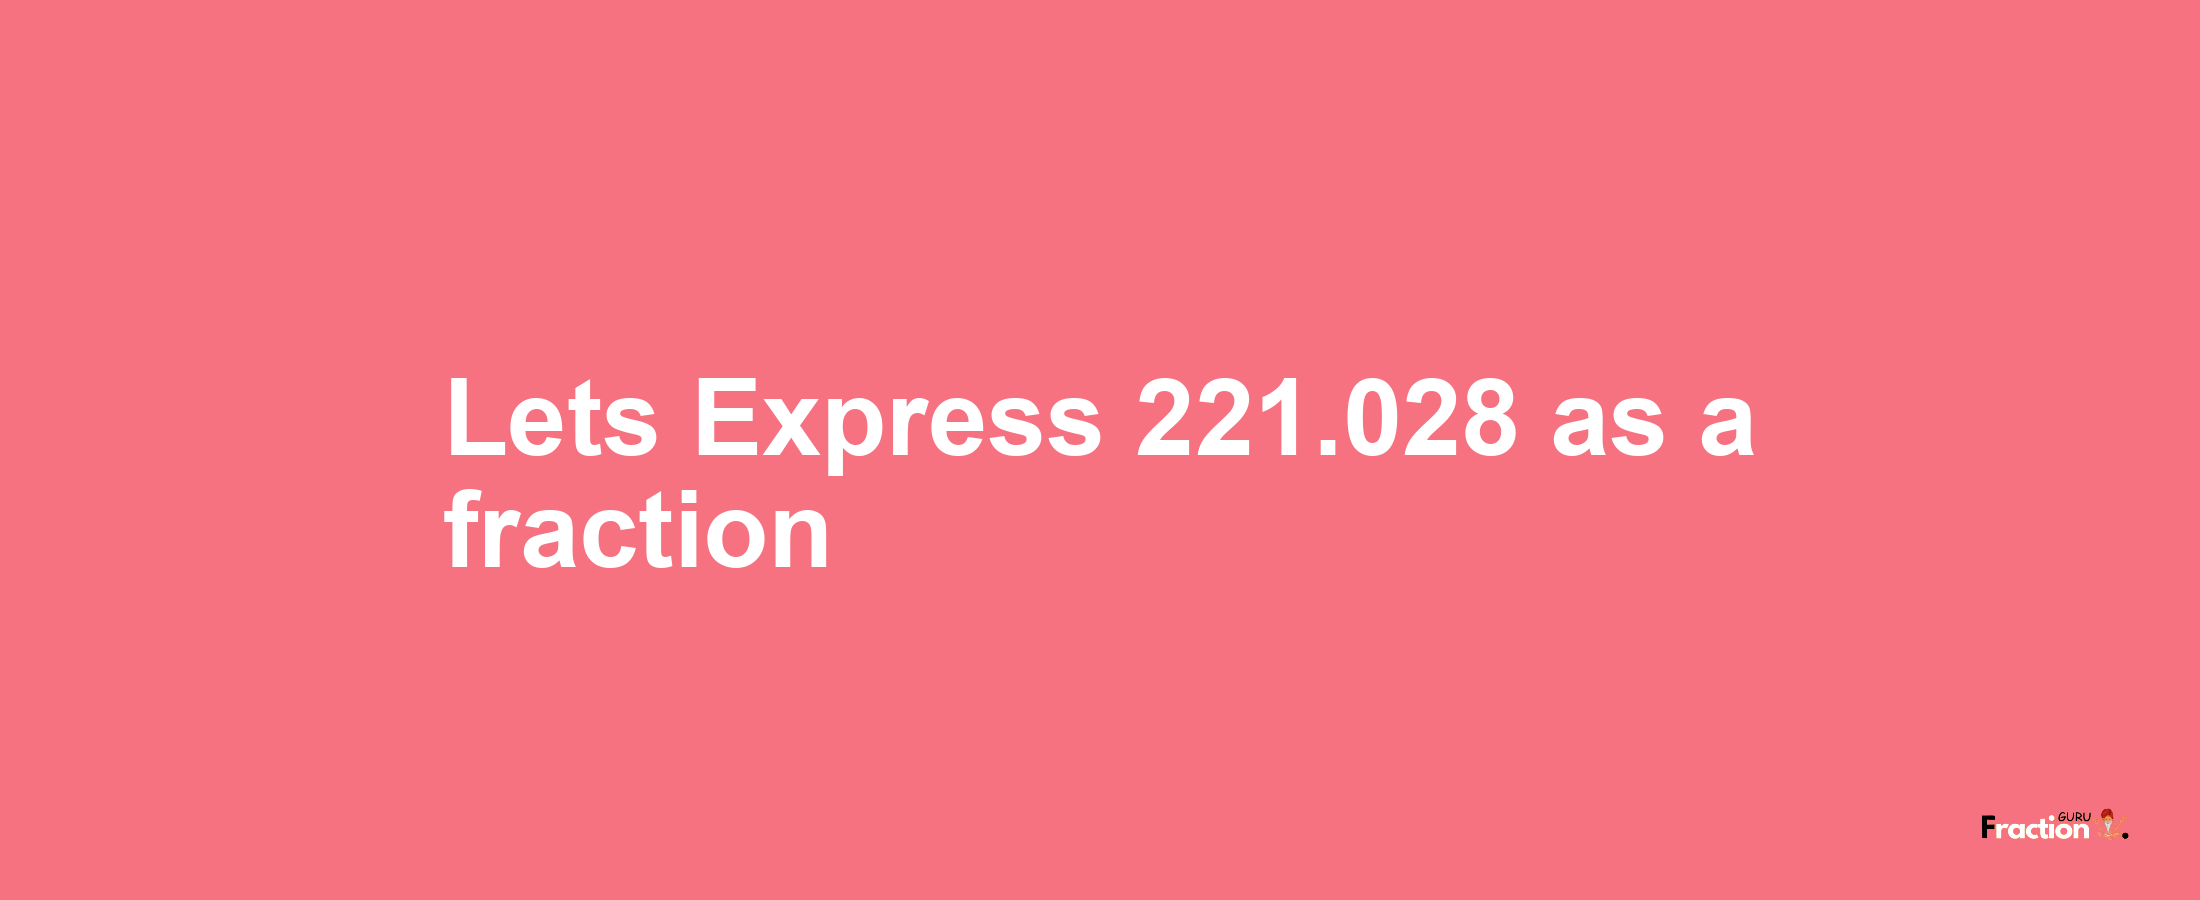 Lets Express 221.028 as afraction